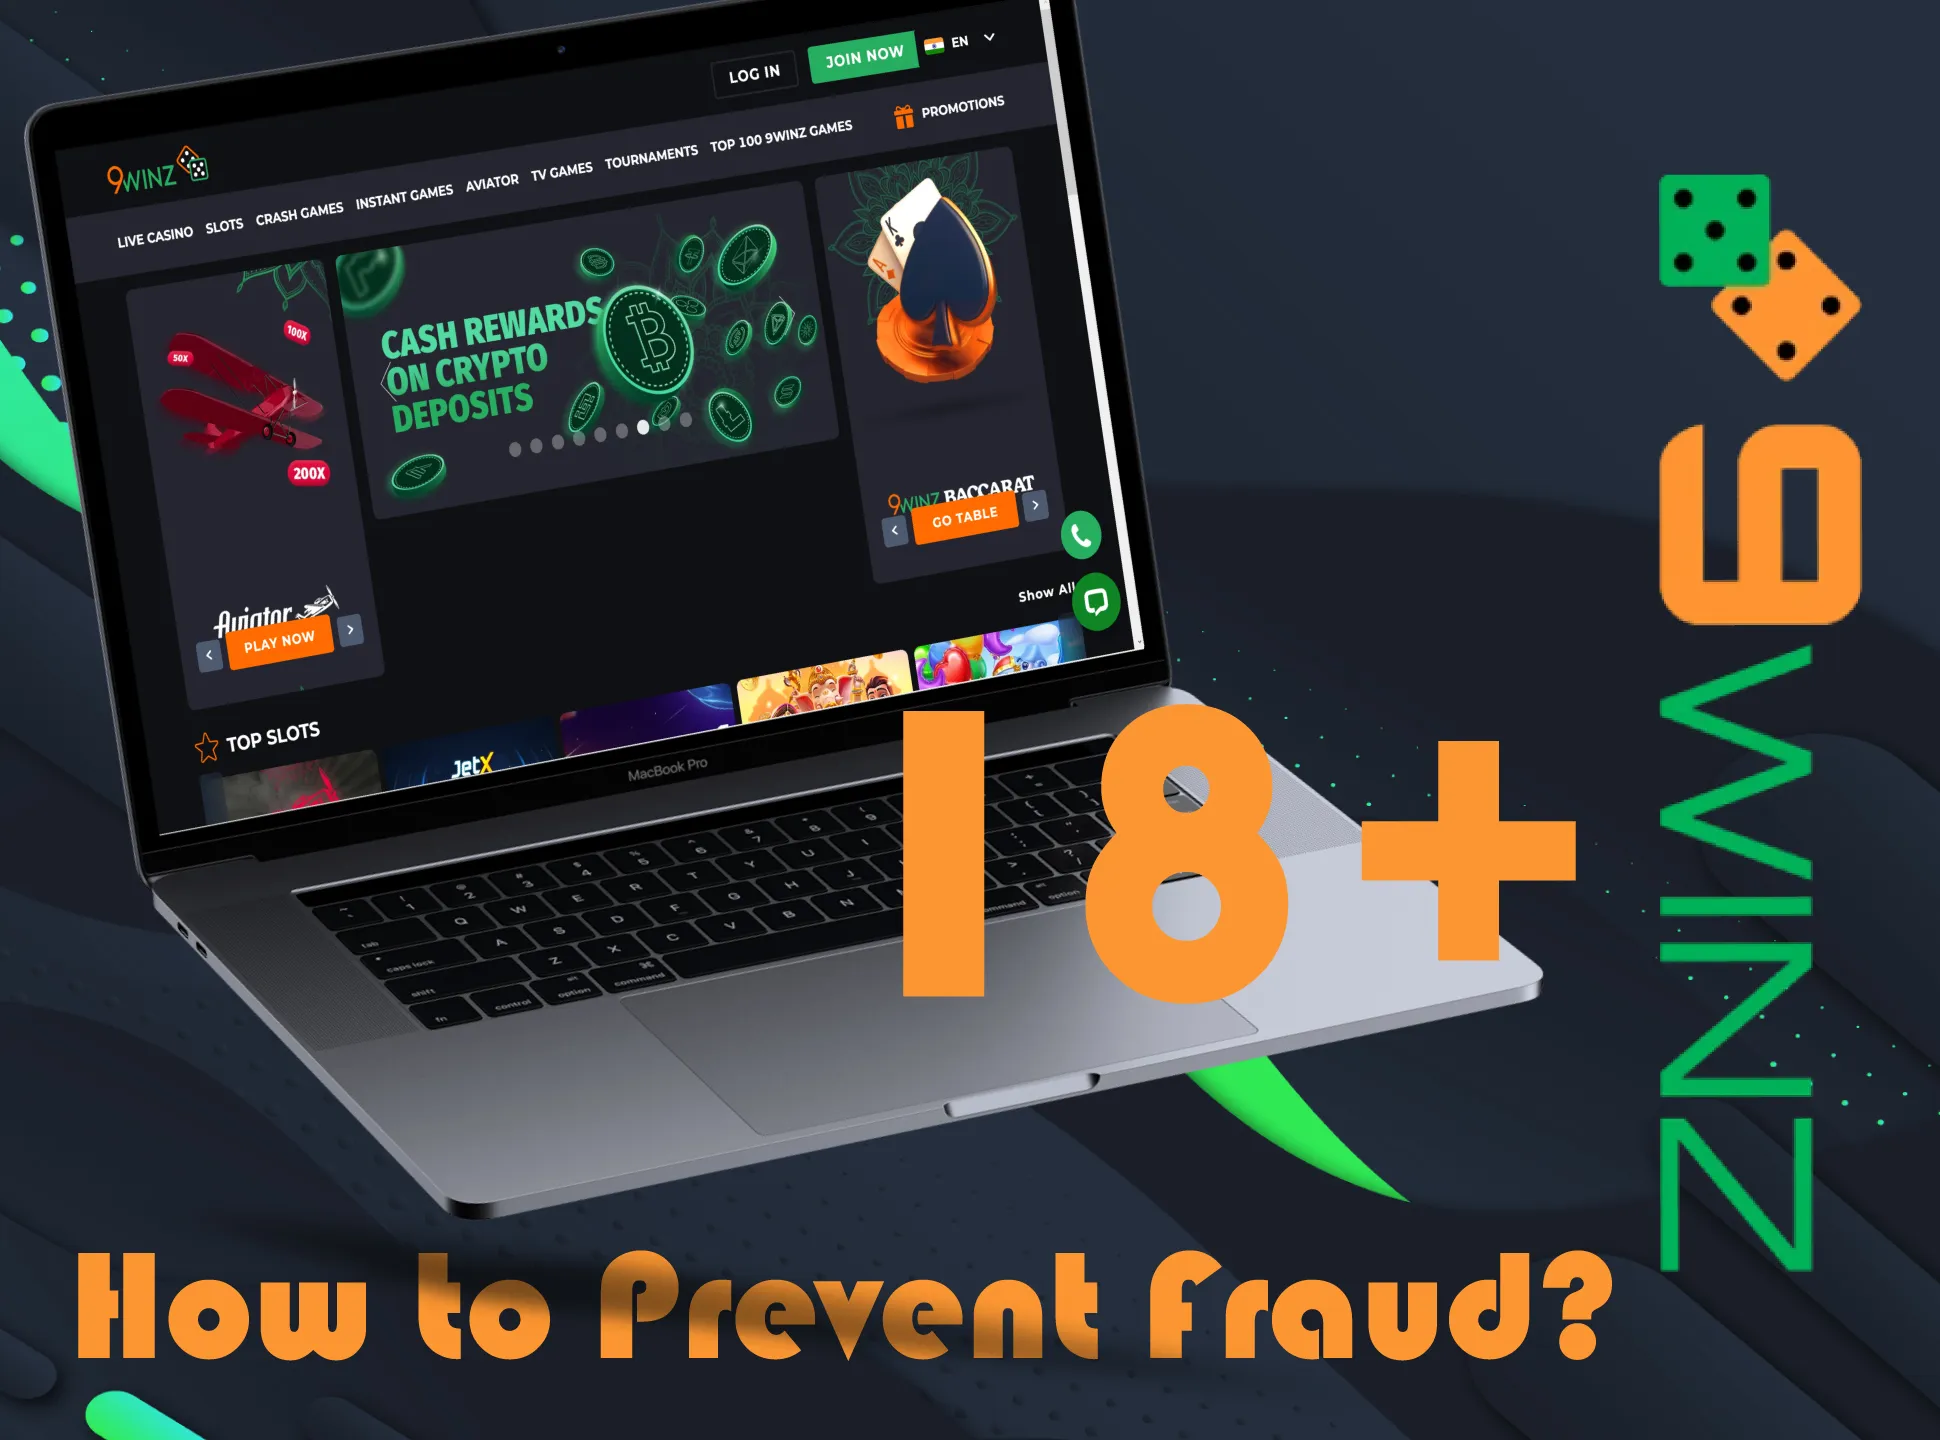 Use 9winz simple tips for preventing fraud.